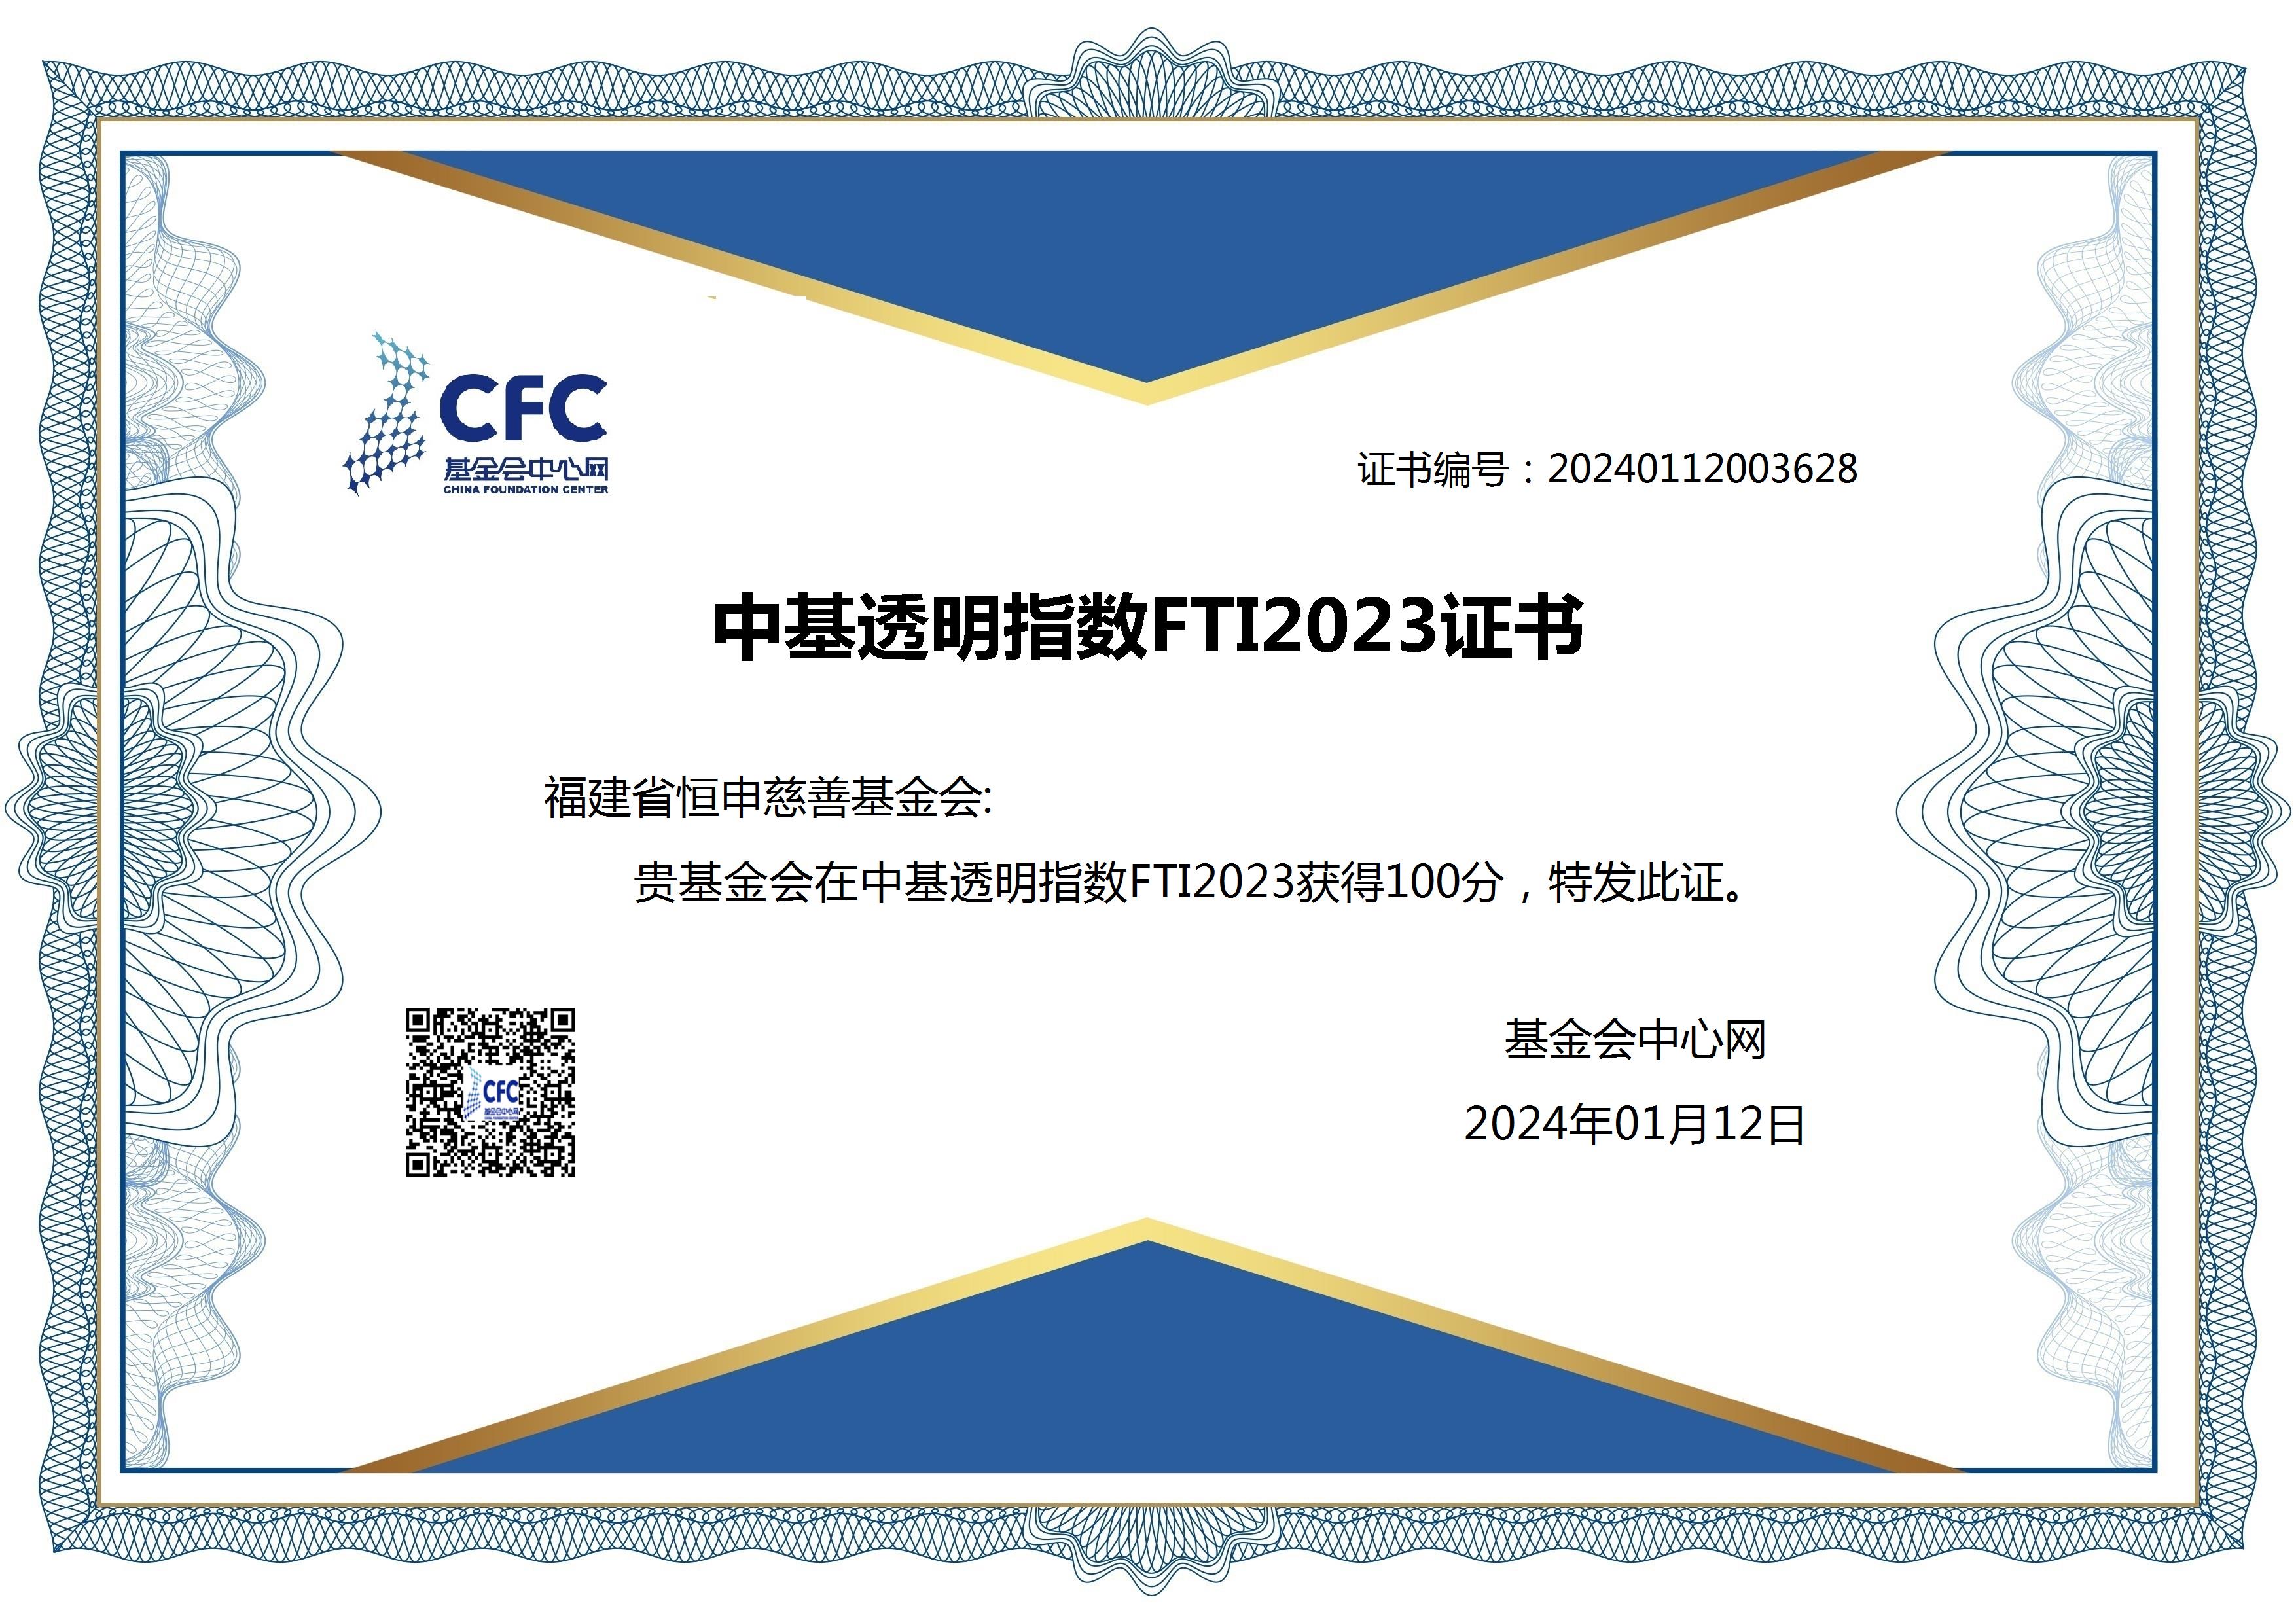 Highsun Foundation scored FTI 100 on the China Foundation Transparency Index